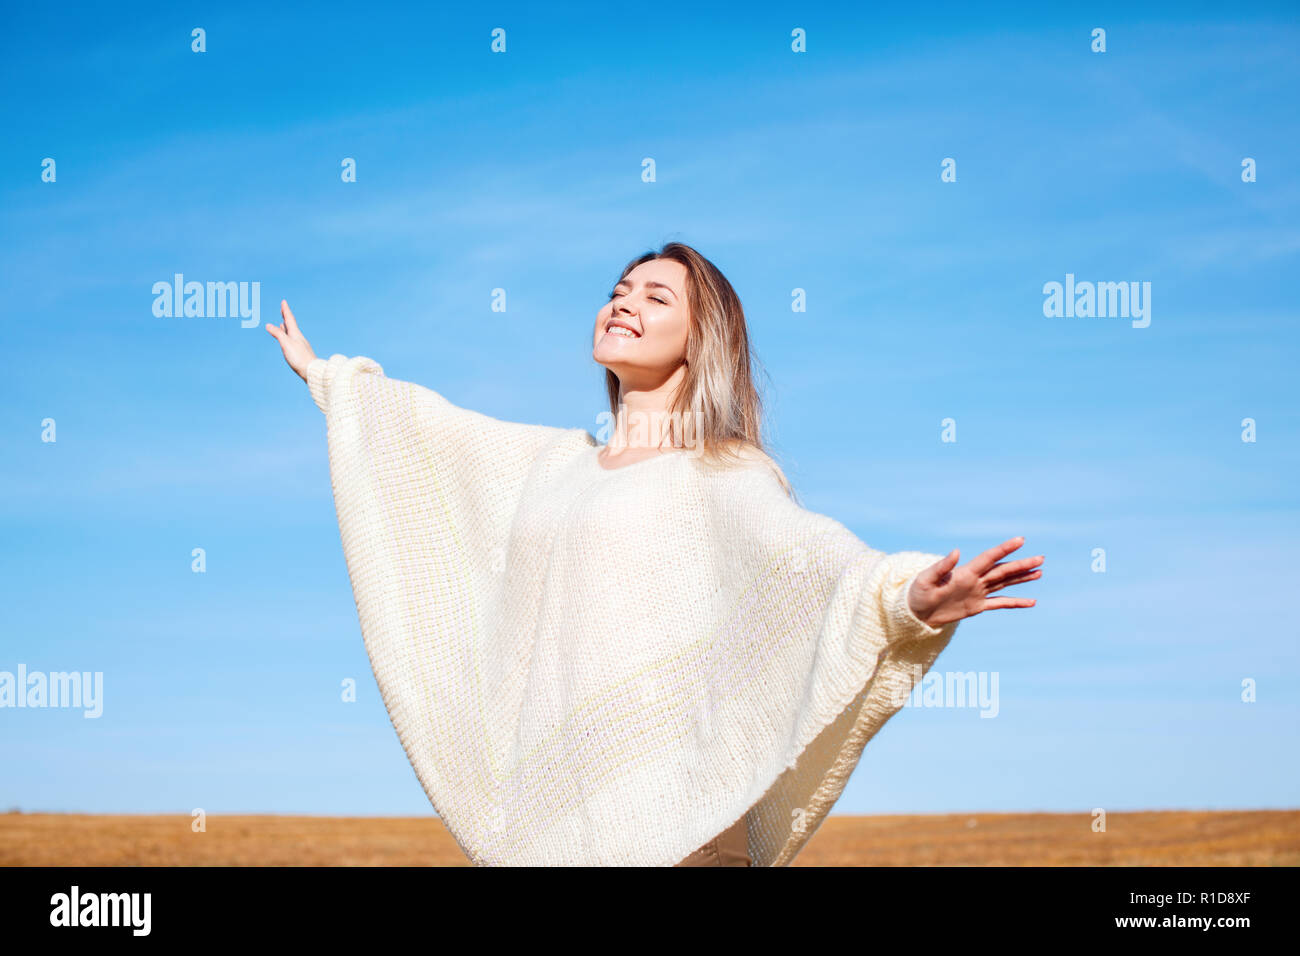 Cheerful girl with raised hands on the field in warm autumn season. Stock Photo